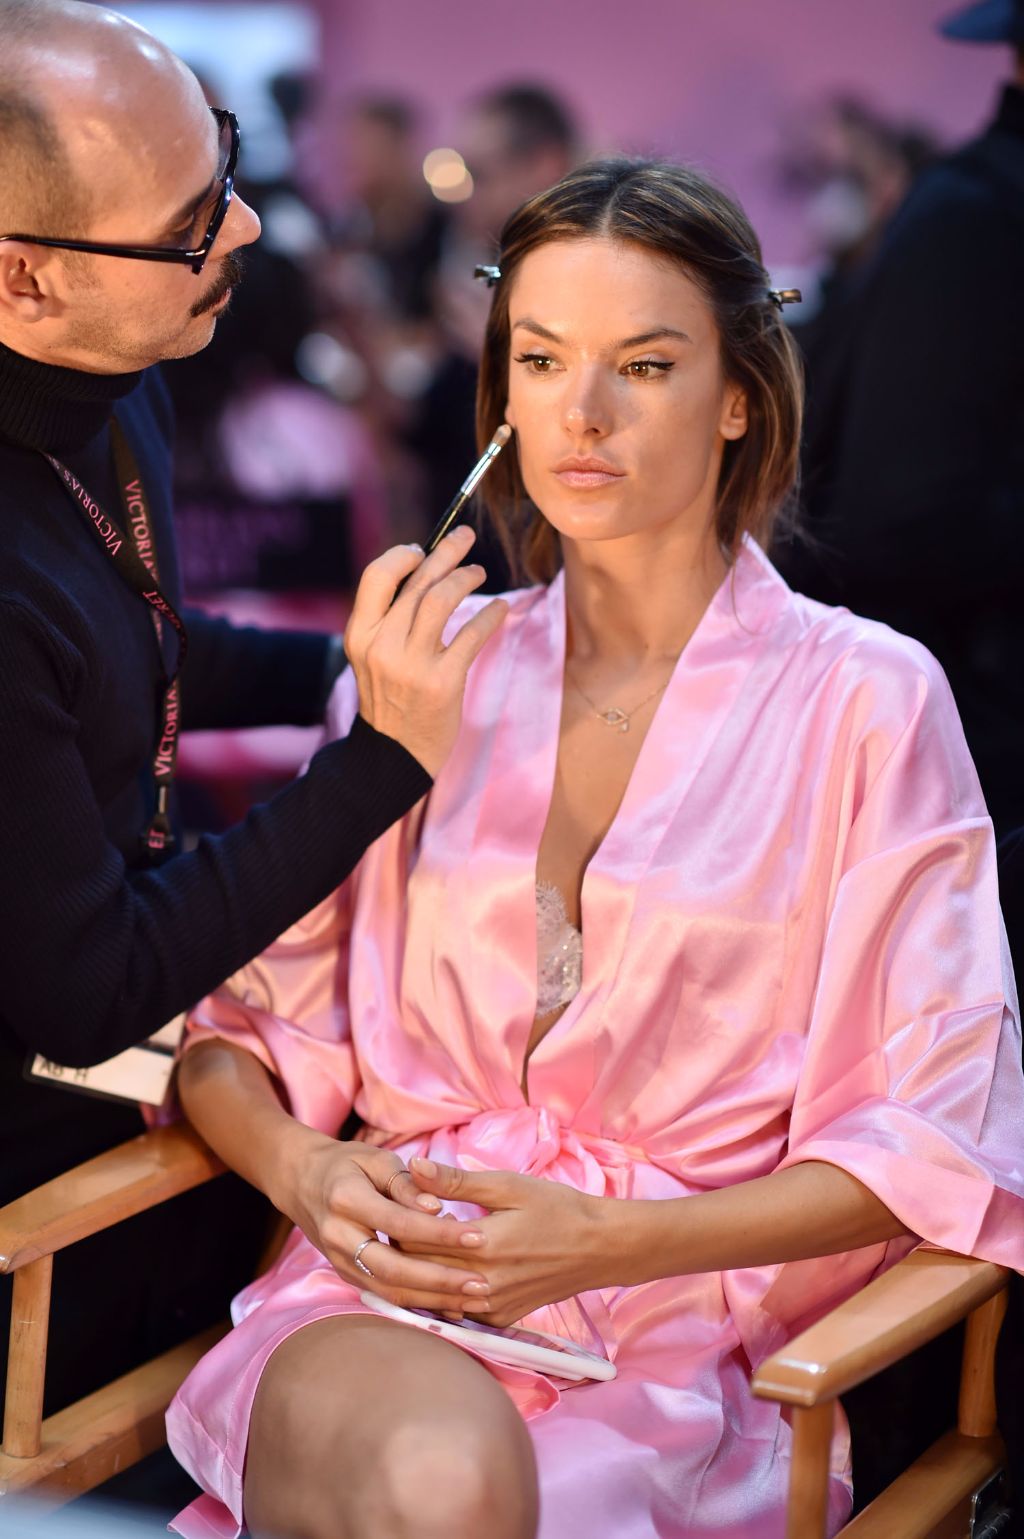 PARIS, FRANCE - NOVEMBER 30: Alessandra Ambrosio has her Hair & Makeup done prior the 2016 Victoria's Secret Fashion Show on November 30, 2016 in Paris, France. (Photo by Pascal Le Segretain/Getty Images for Victoria's Secret)